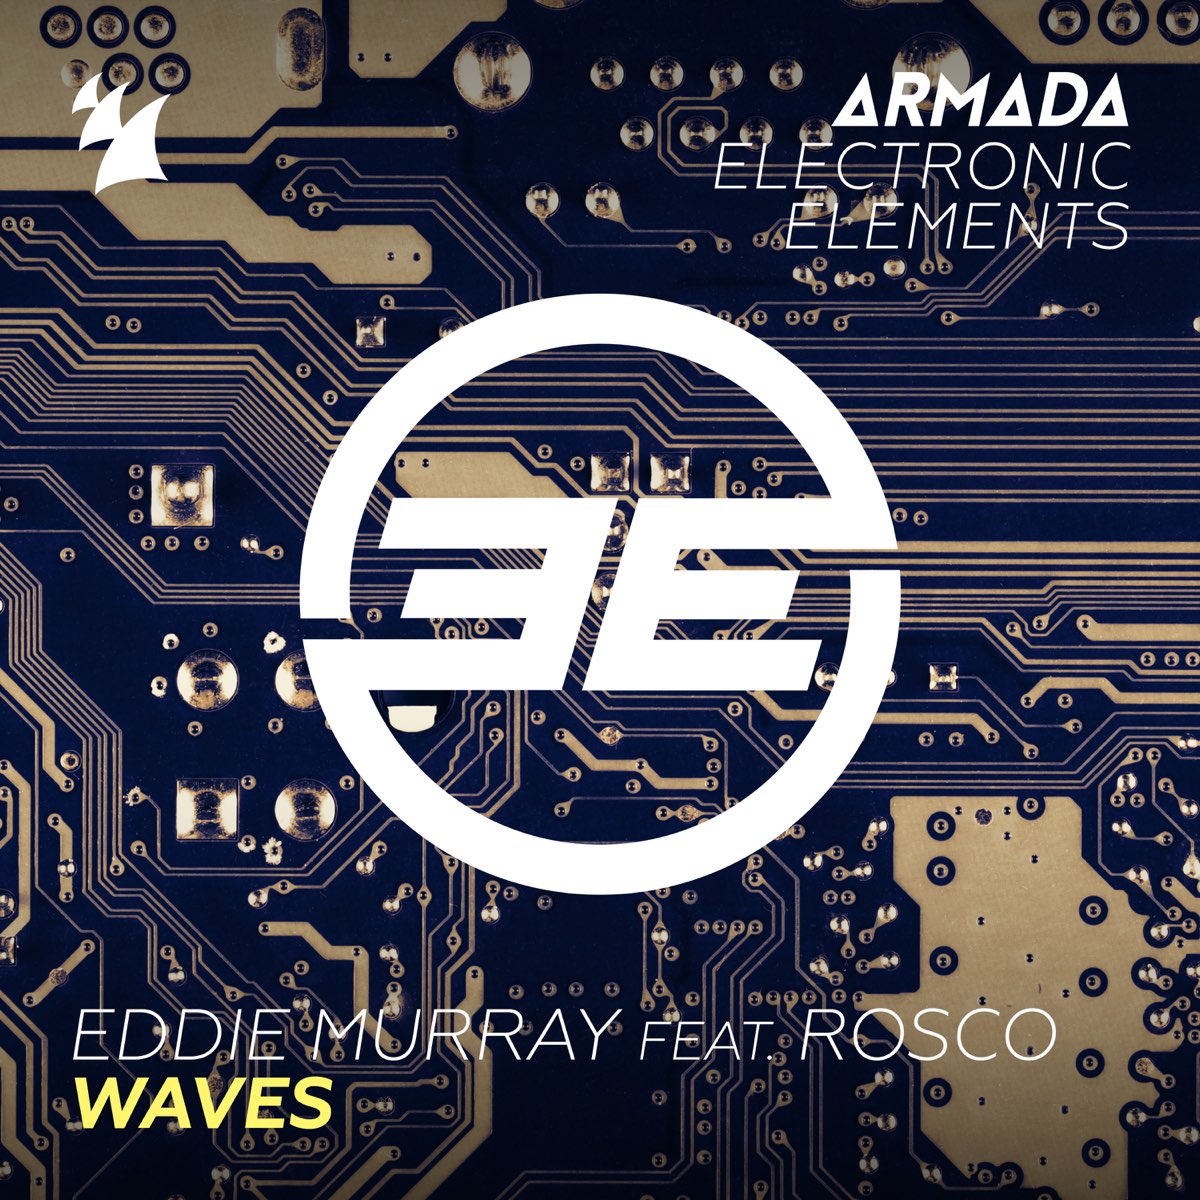 Waves feat. Electronic elements. Electronic Wave. Eat Waves.